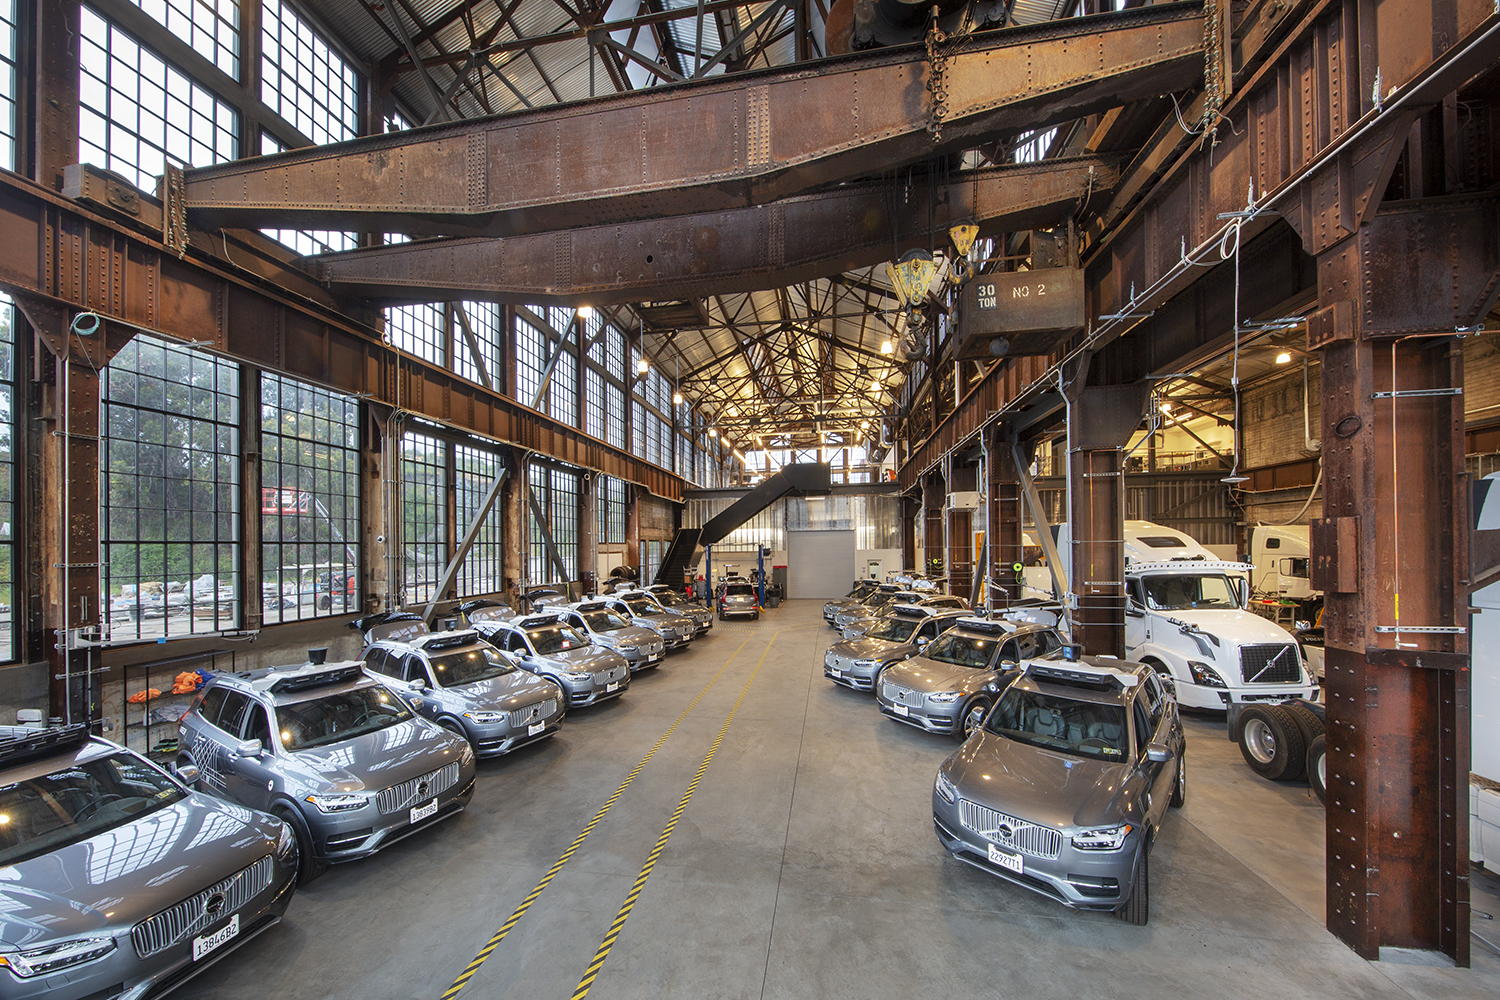 05_Projects_Adaptive Reuse of Historic Pier 70.jpg